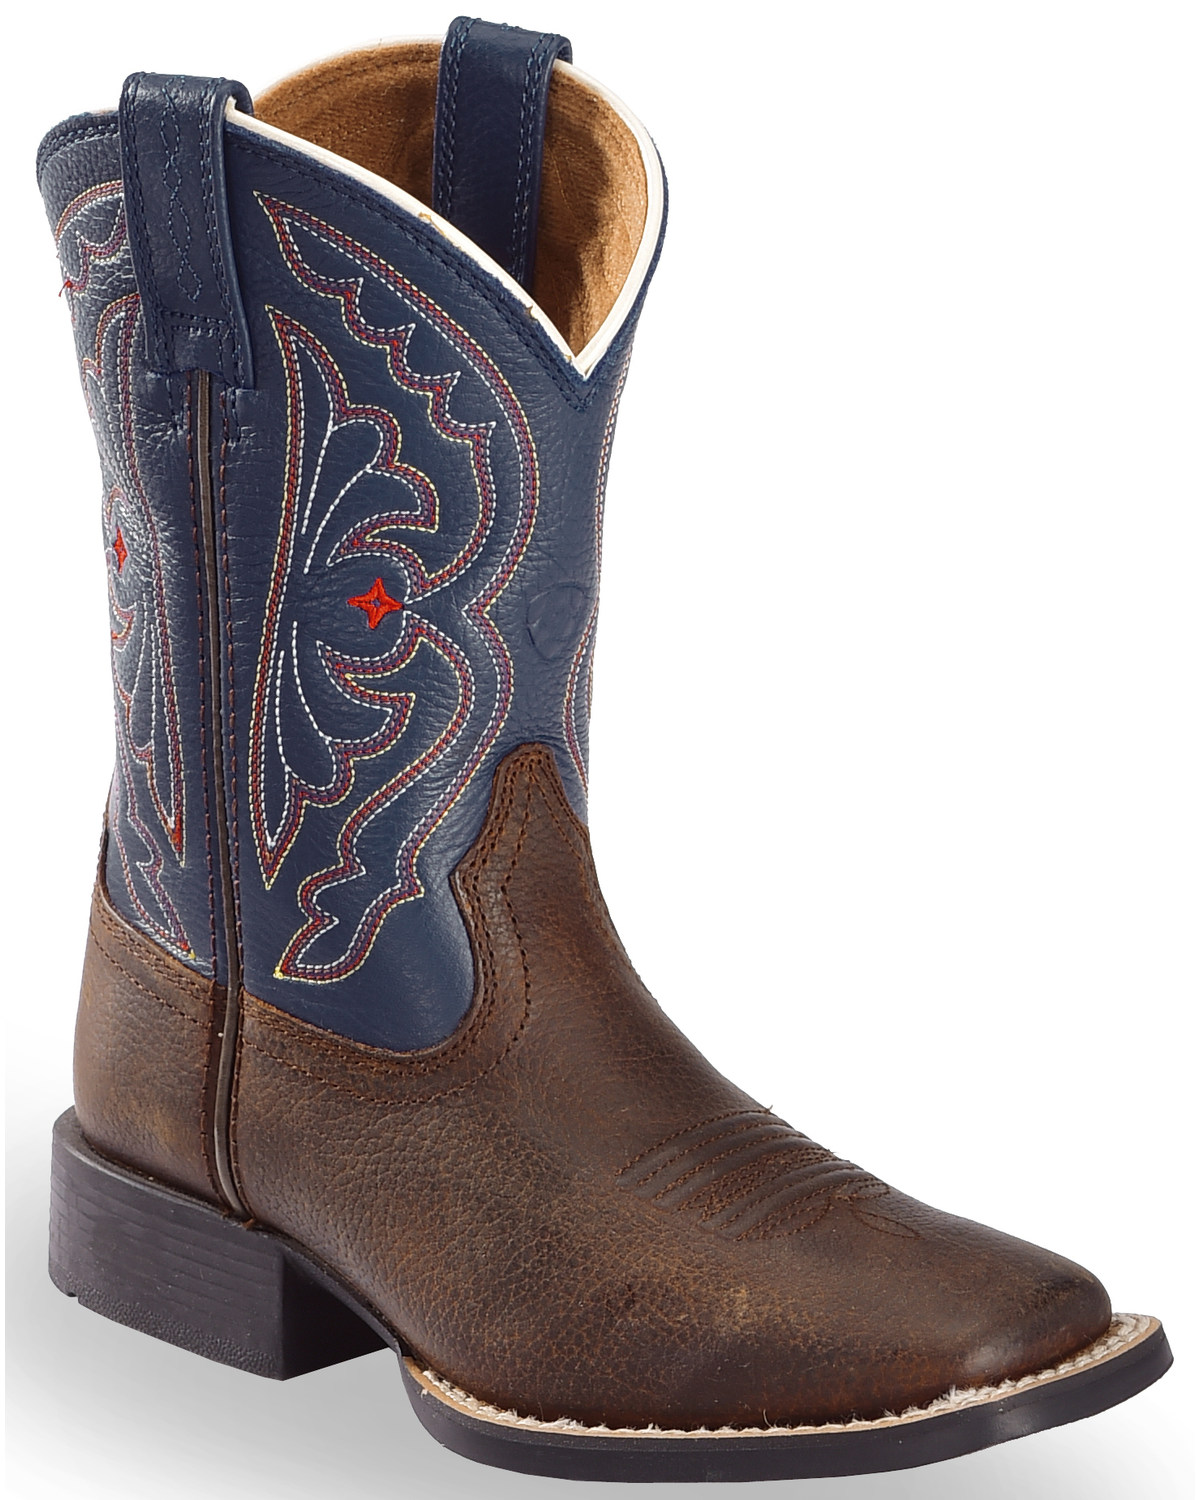 Ariat Boys' Royal Blue Quickdraw Western Boots - Square Toe